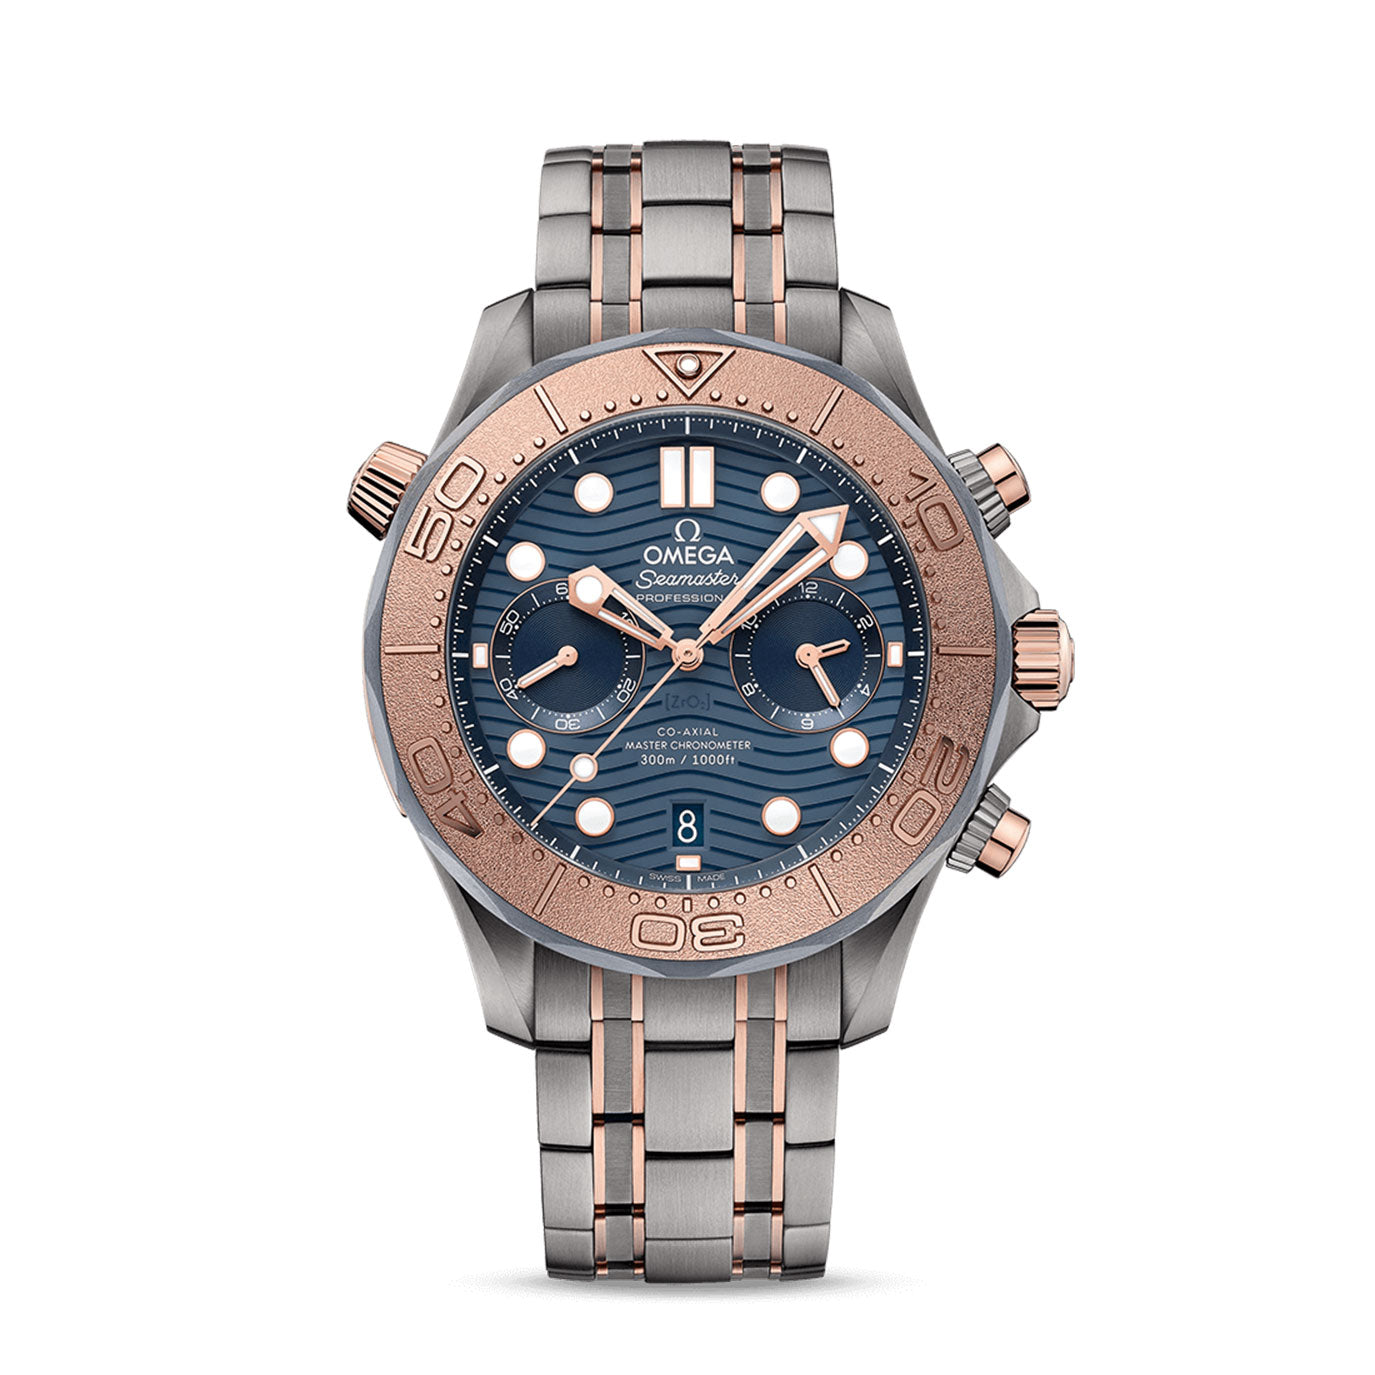 Omega Seamaster DIVER 300M CO‑AXIAL MASTER CHRONOMETER CHRONOGRAPH Ref# 210.60.44.51.03.001